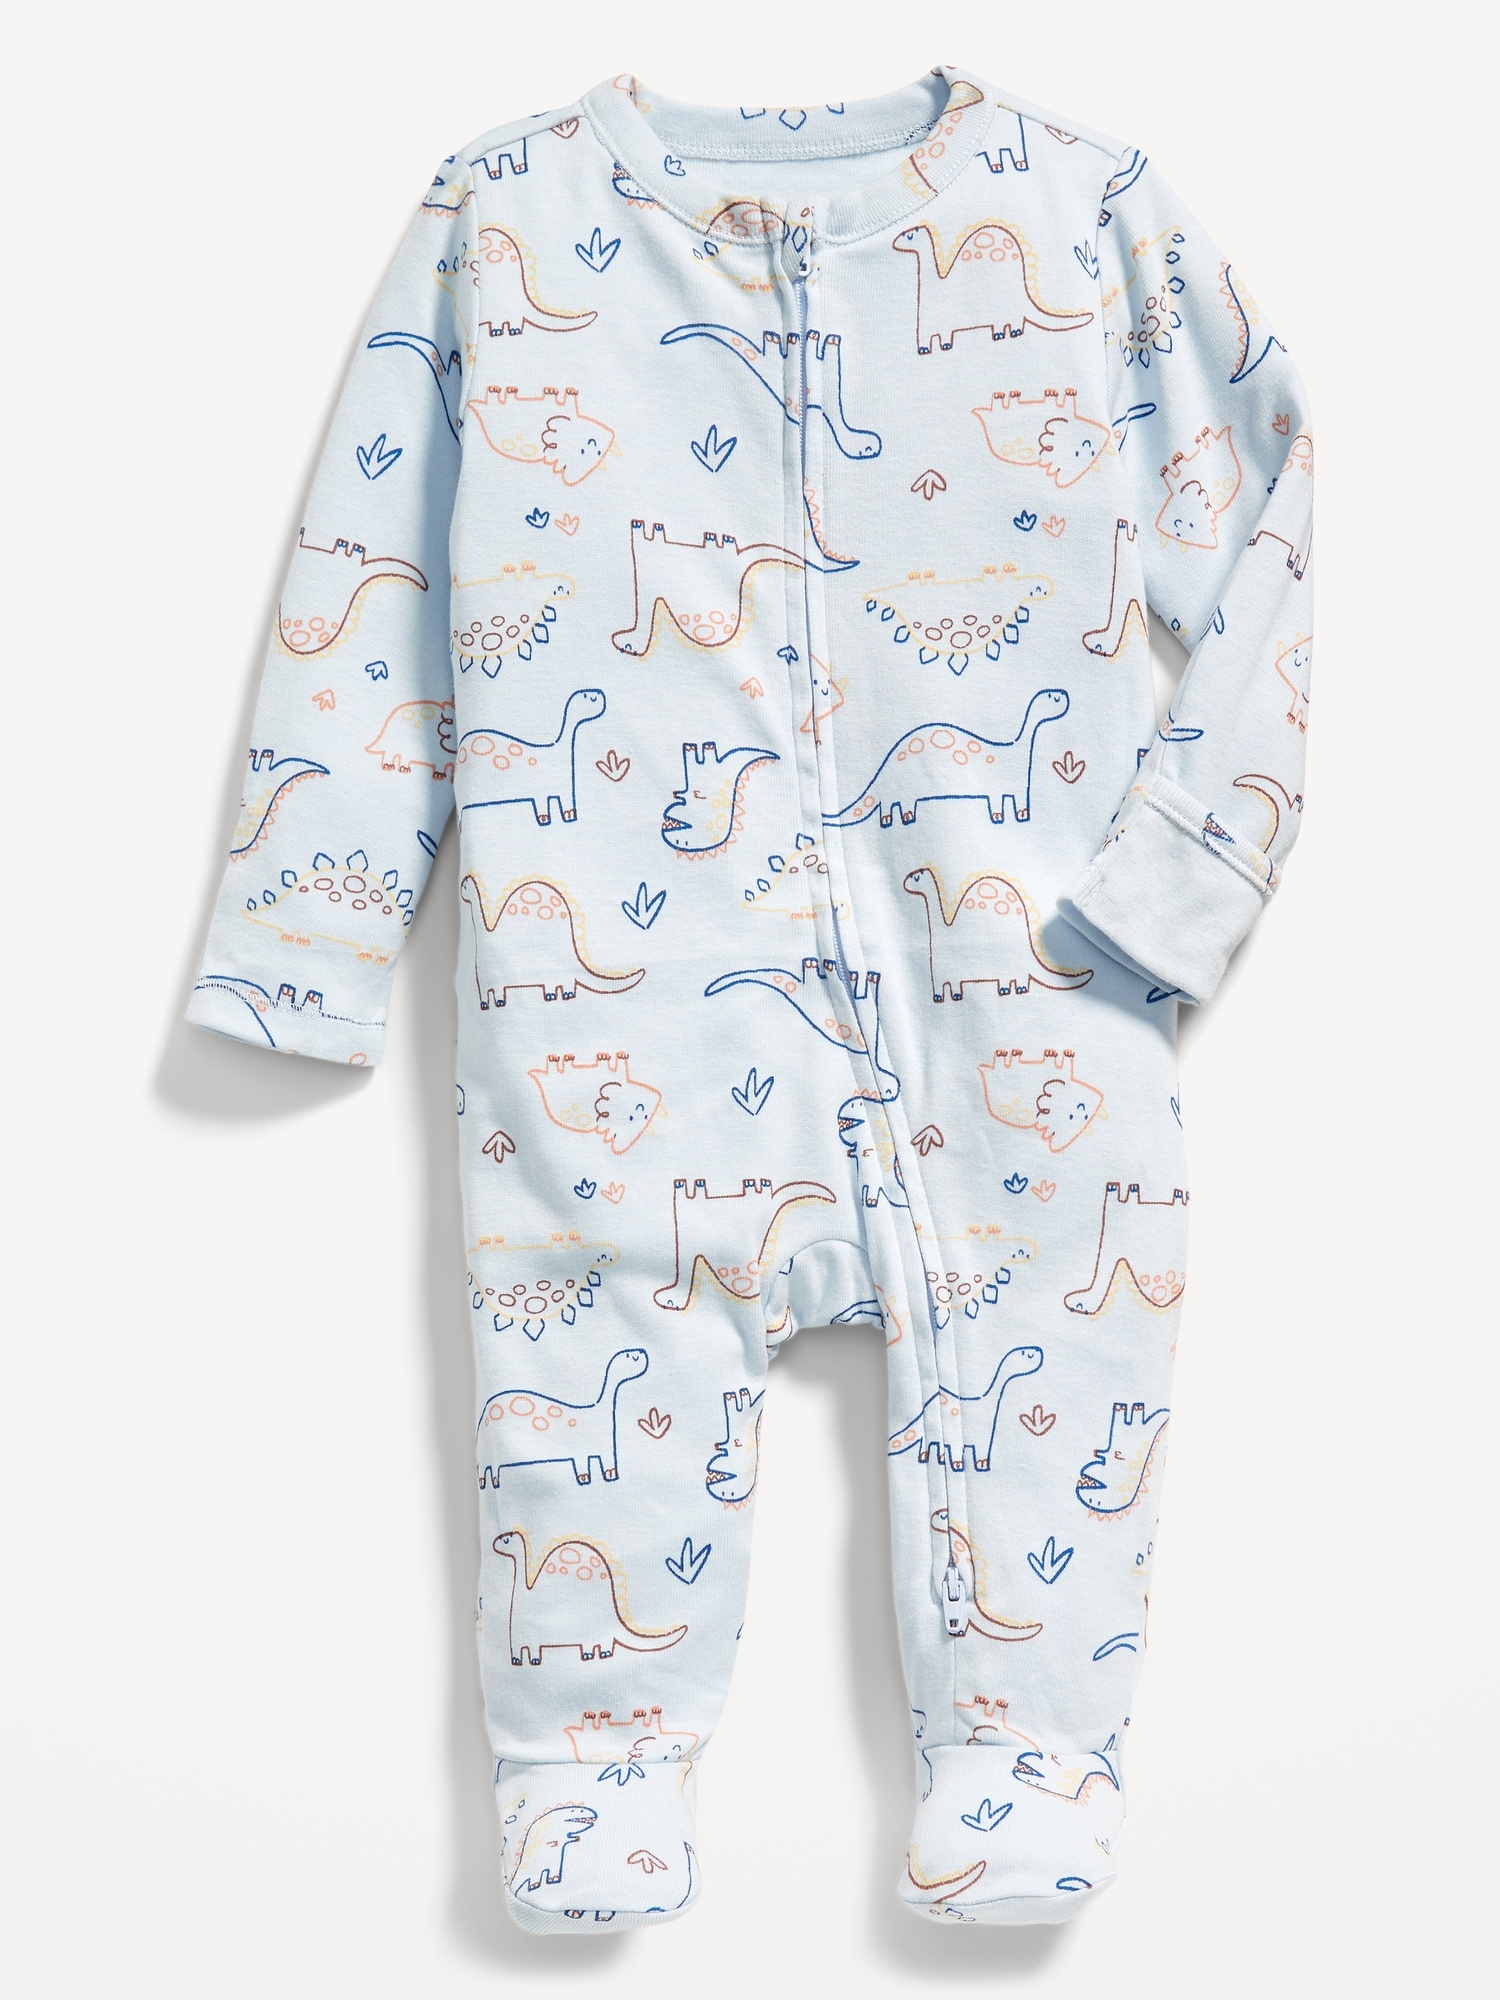 Sleep & Play 2-Way-Zip Footed One-Piece for Baby